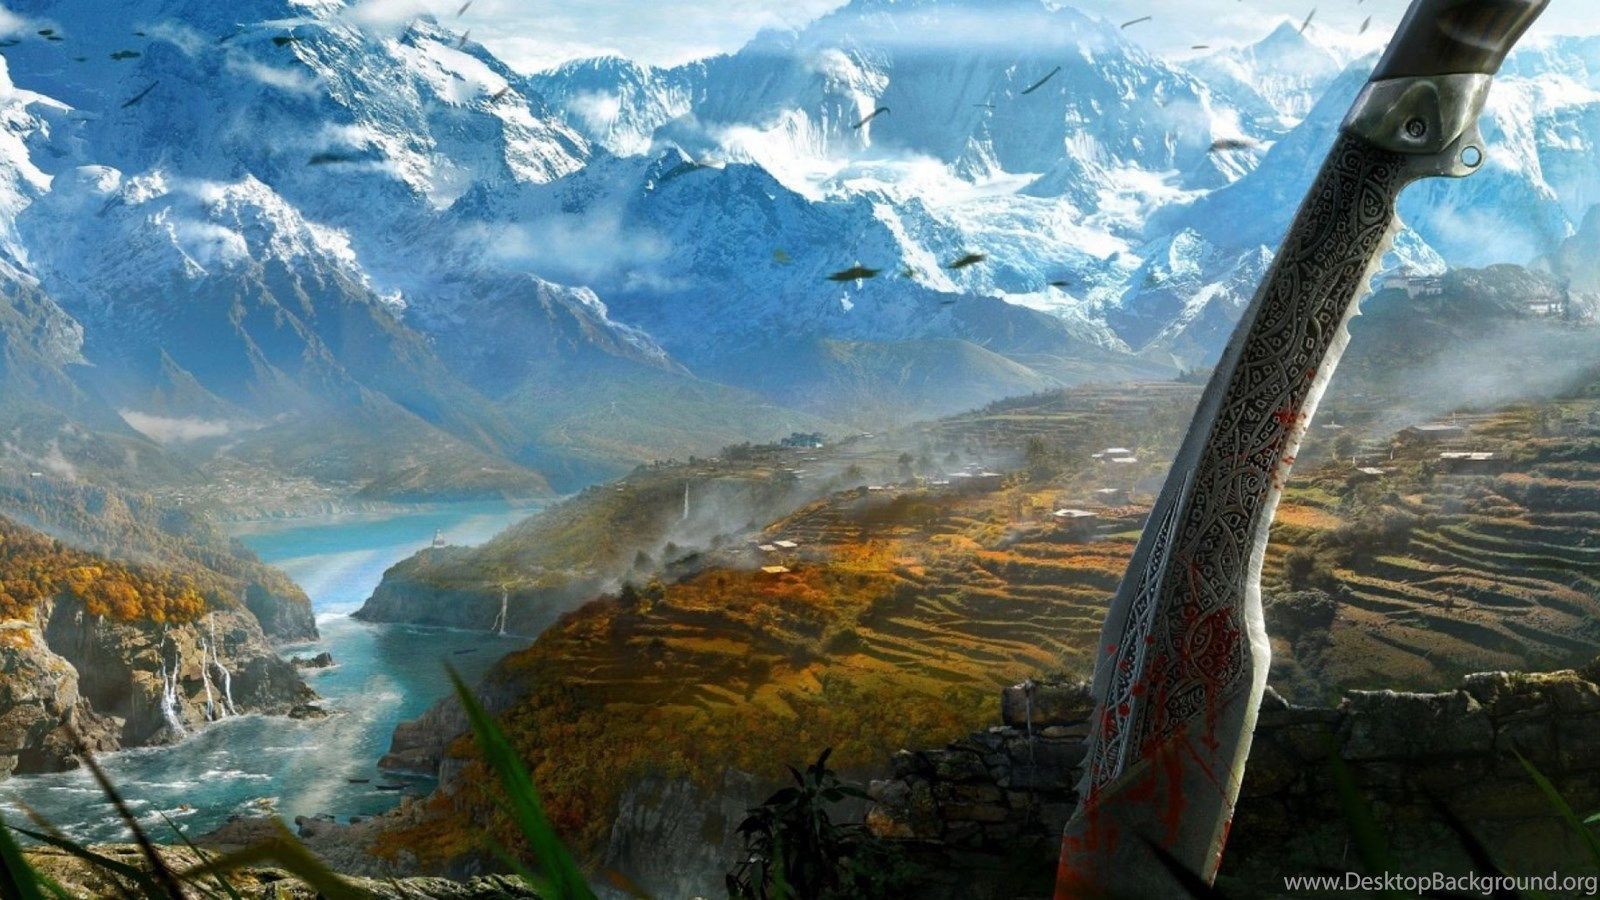 Far Cry 4 interview